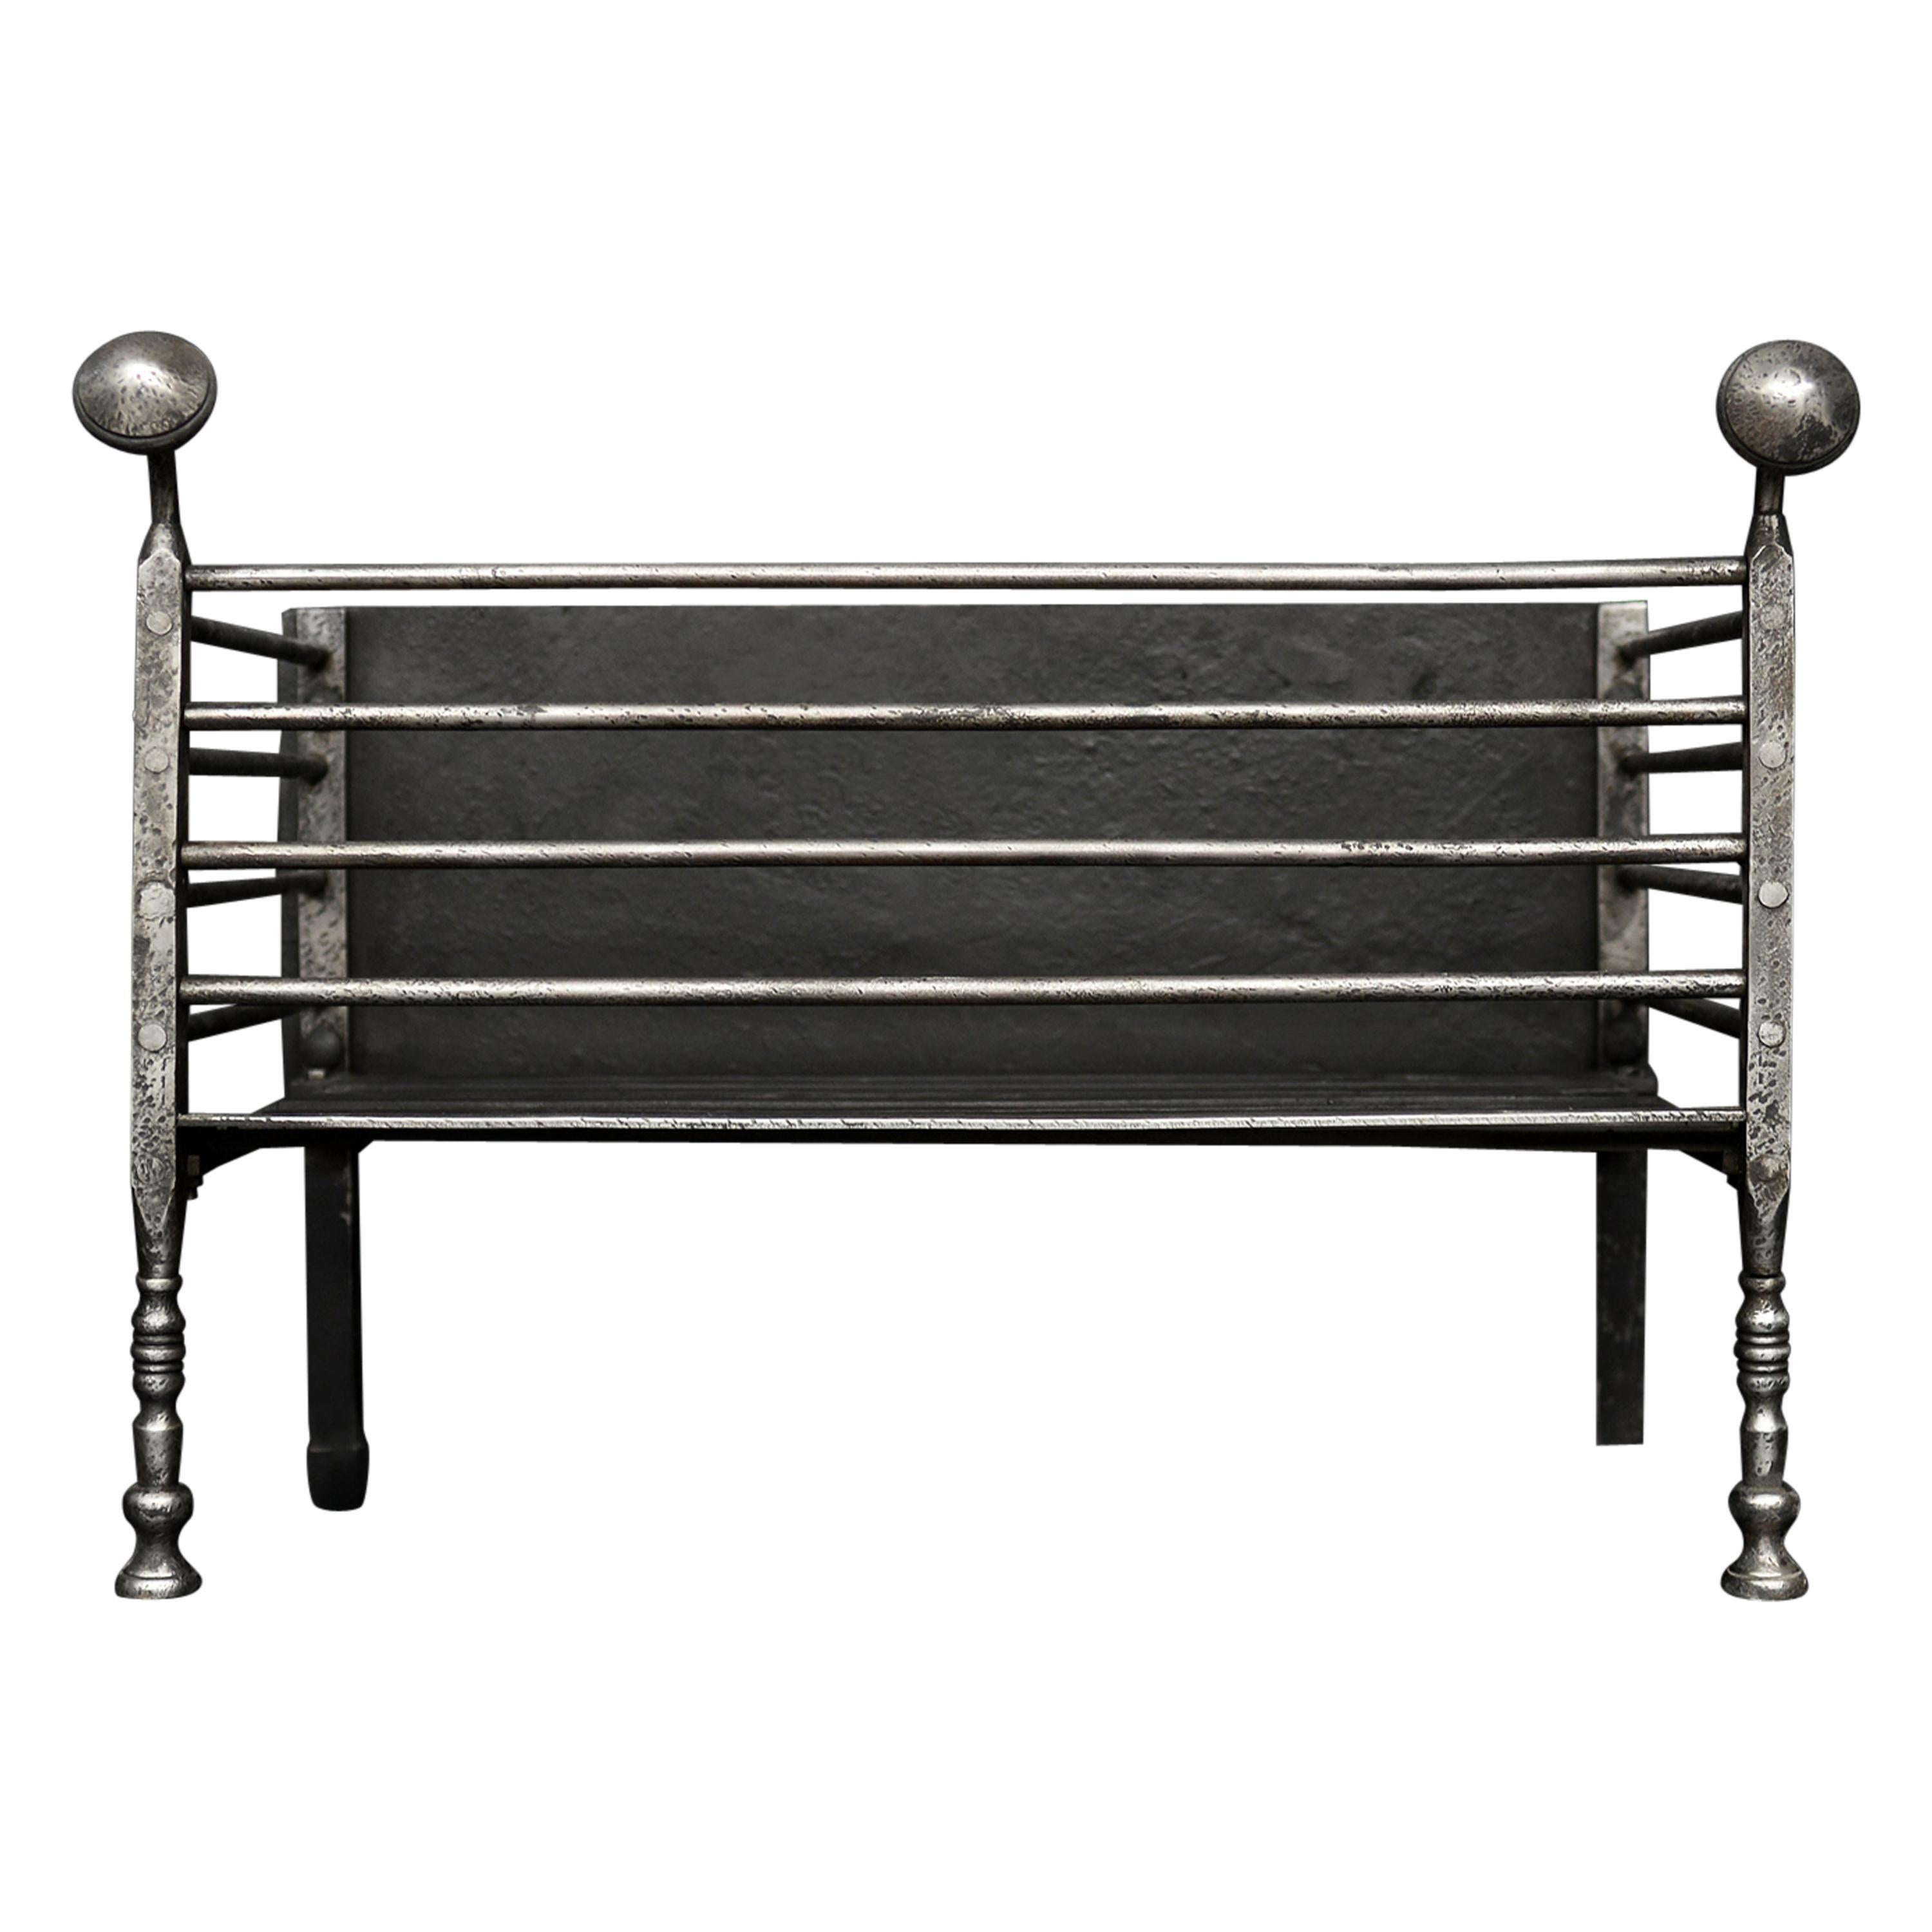 English Polished Wrought Iron Firebasket of Architectural Form